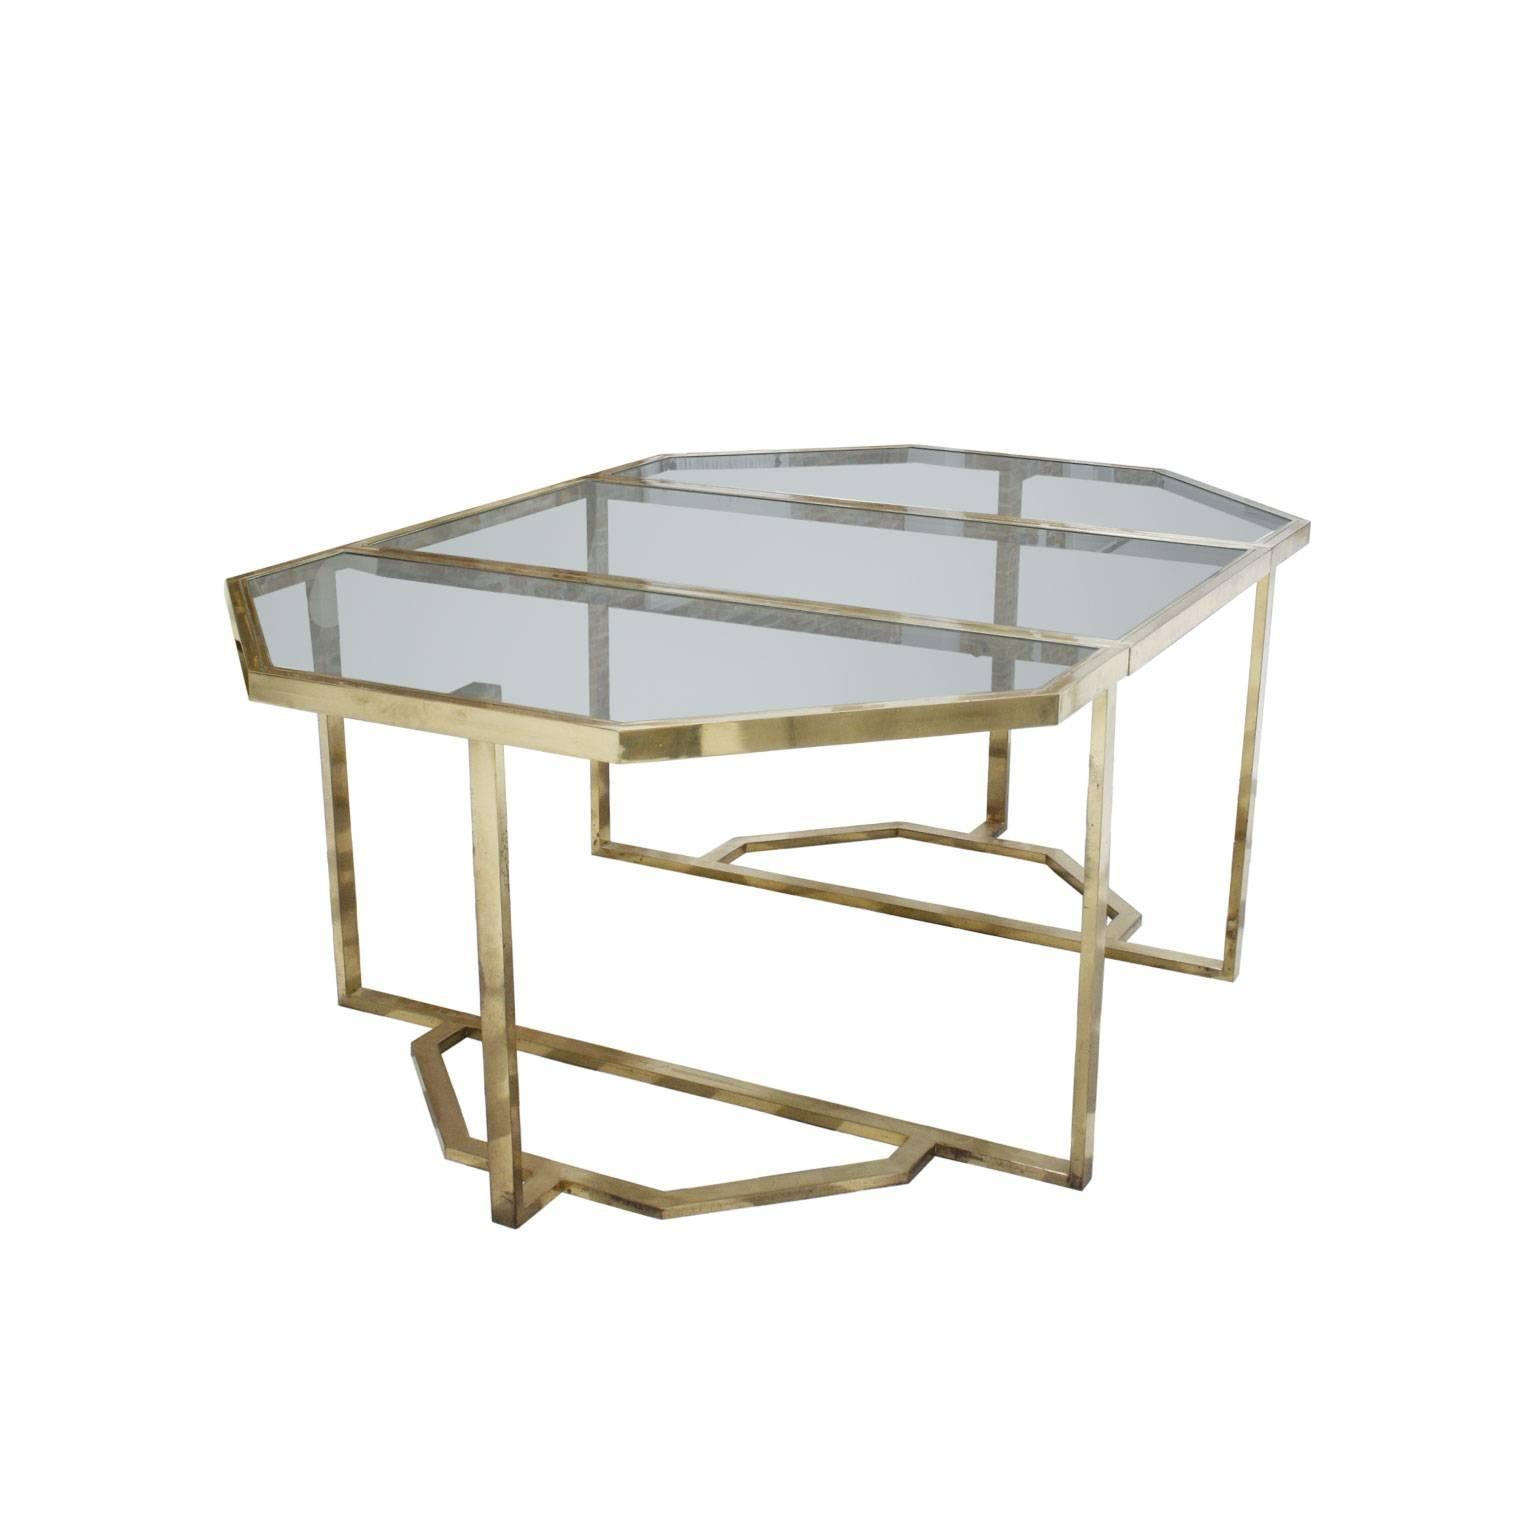 Dining table in style of Gabriella Crespi, made up of two independent bodies, convertible into a console, with a brass handcrafted structure and tan glass envelopes, Italy, 1970.